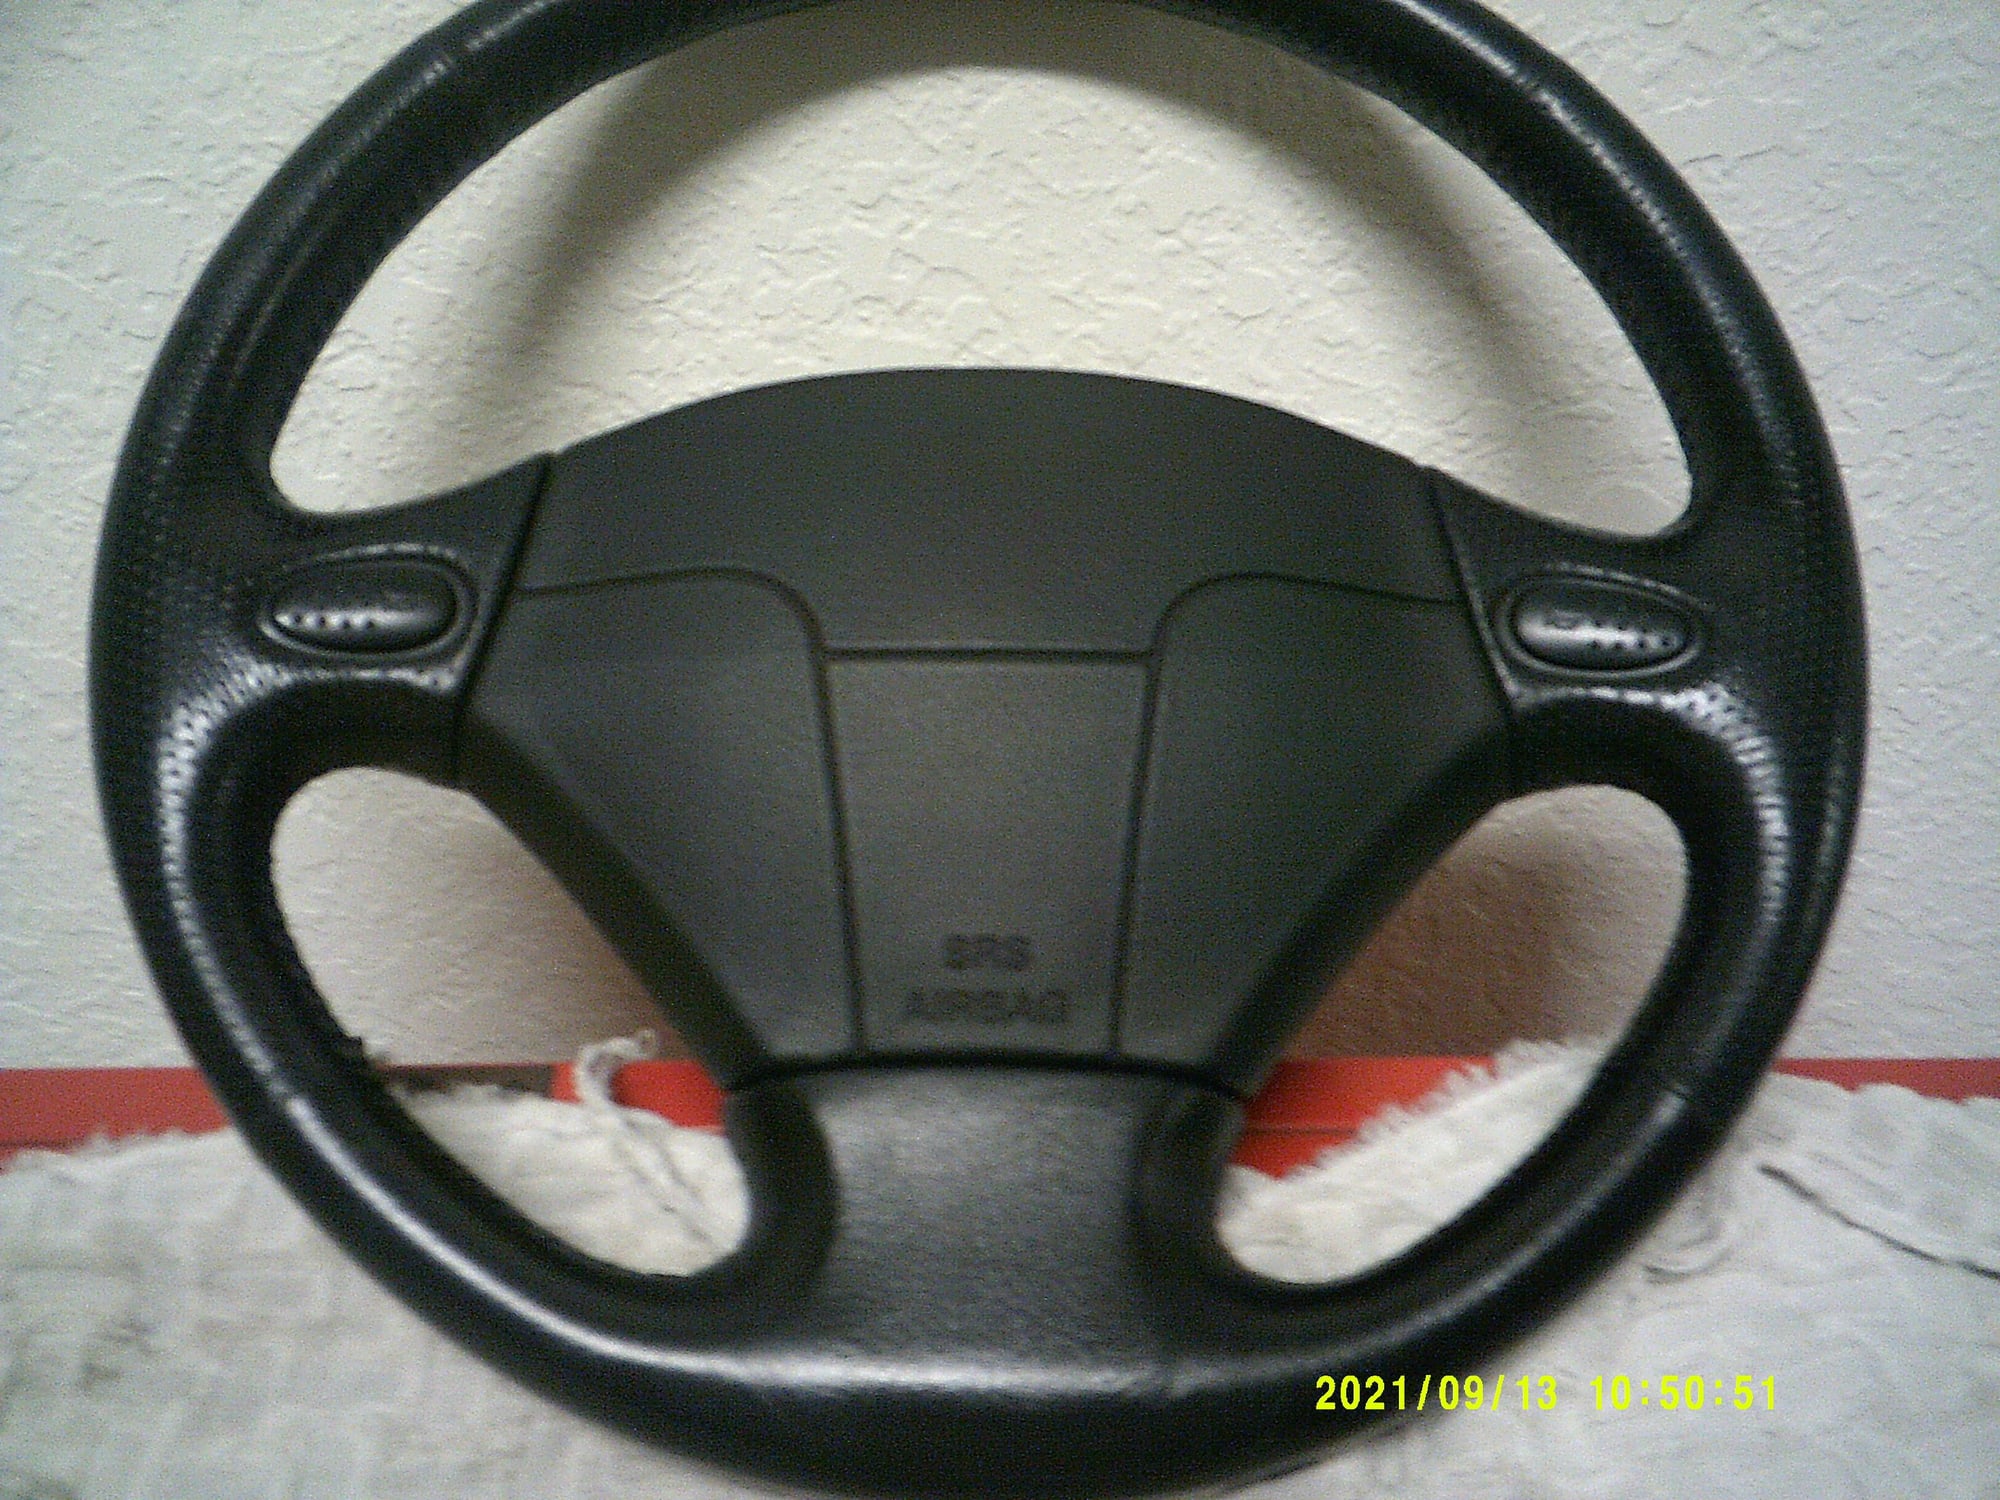 1994 Mazda RX-7 - Stock steering wheel, ECU, fuel rails and injectors, coil pack and control unit more - Miscellaneous - $175 - Punta Gorda, FL 33982, United States